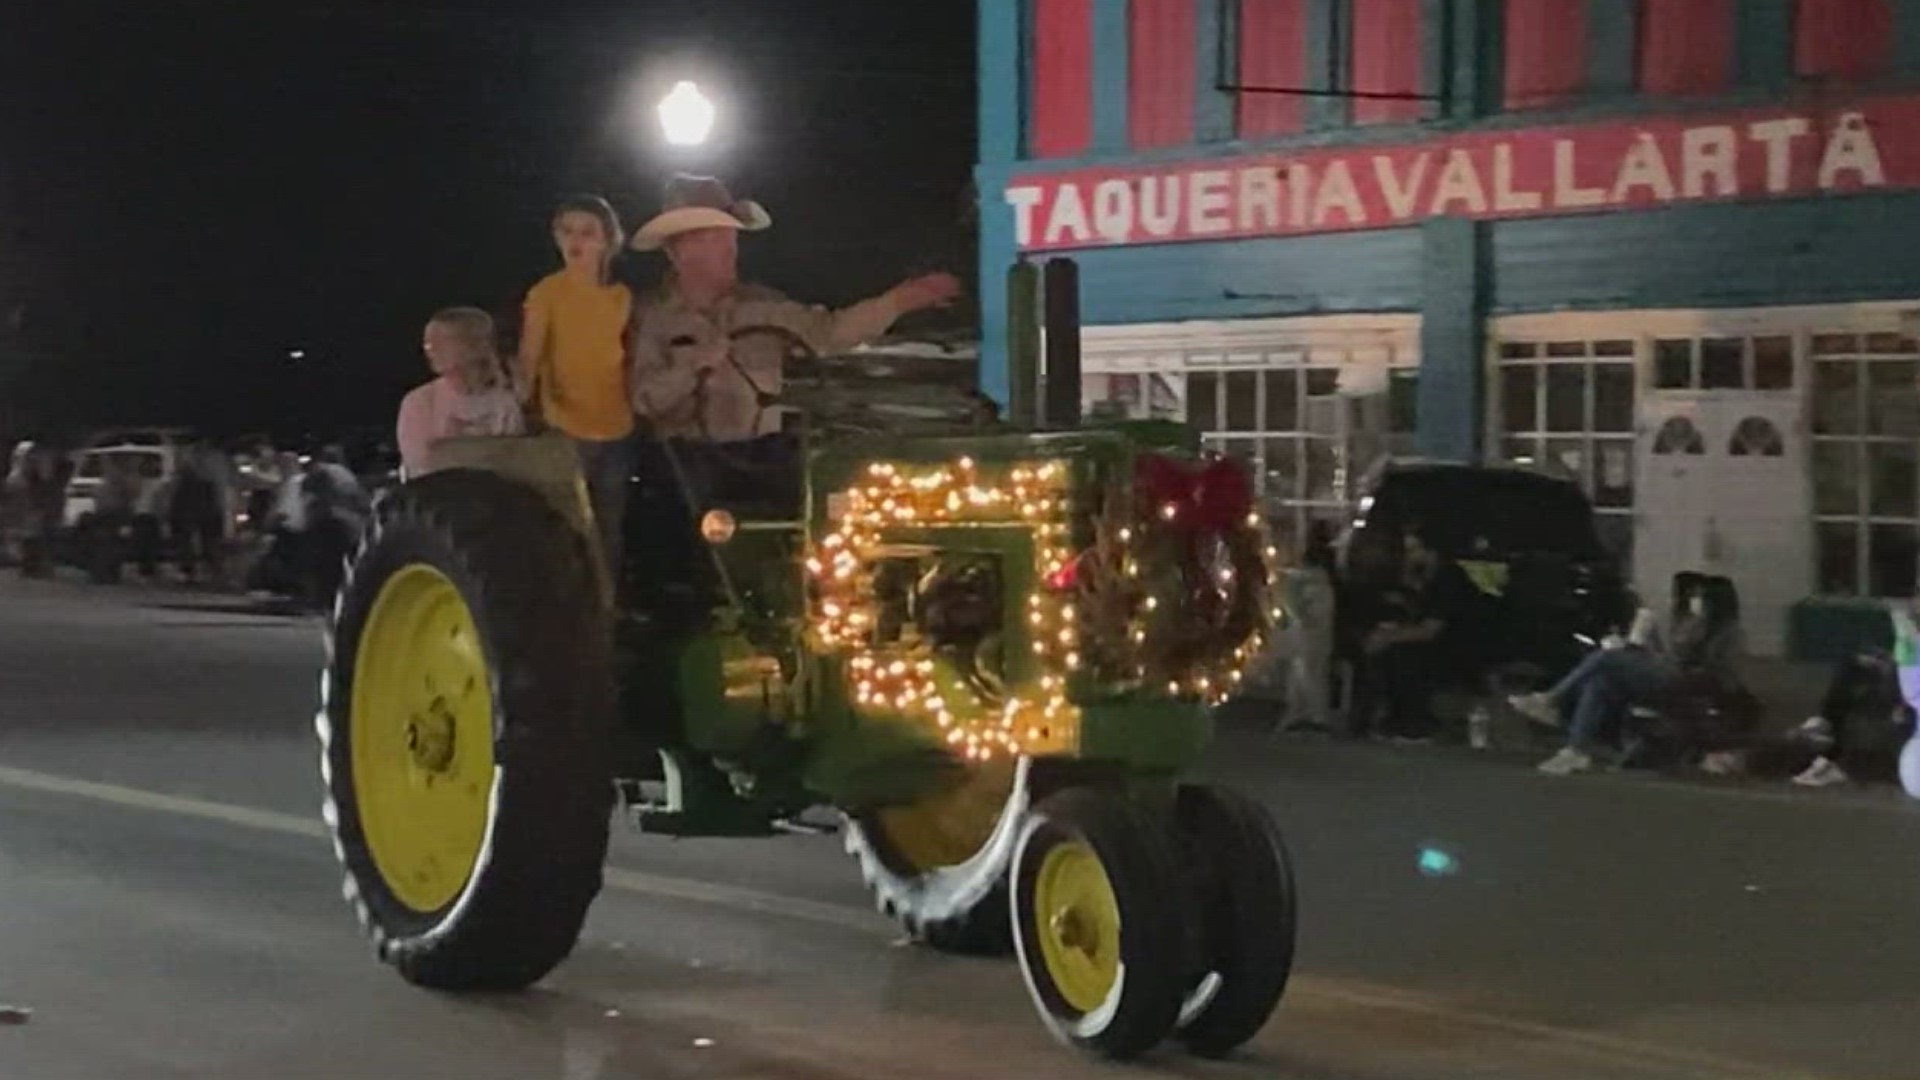 The Grinch was even there, along with a band and farmers on tractors!